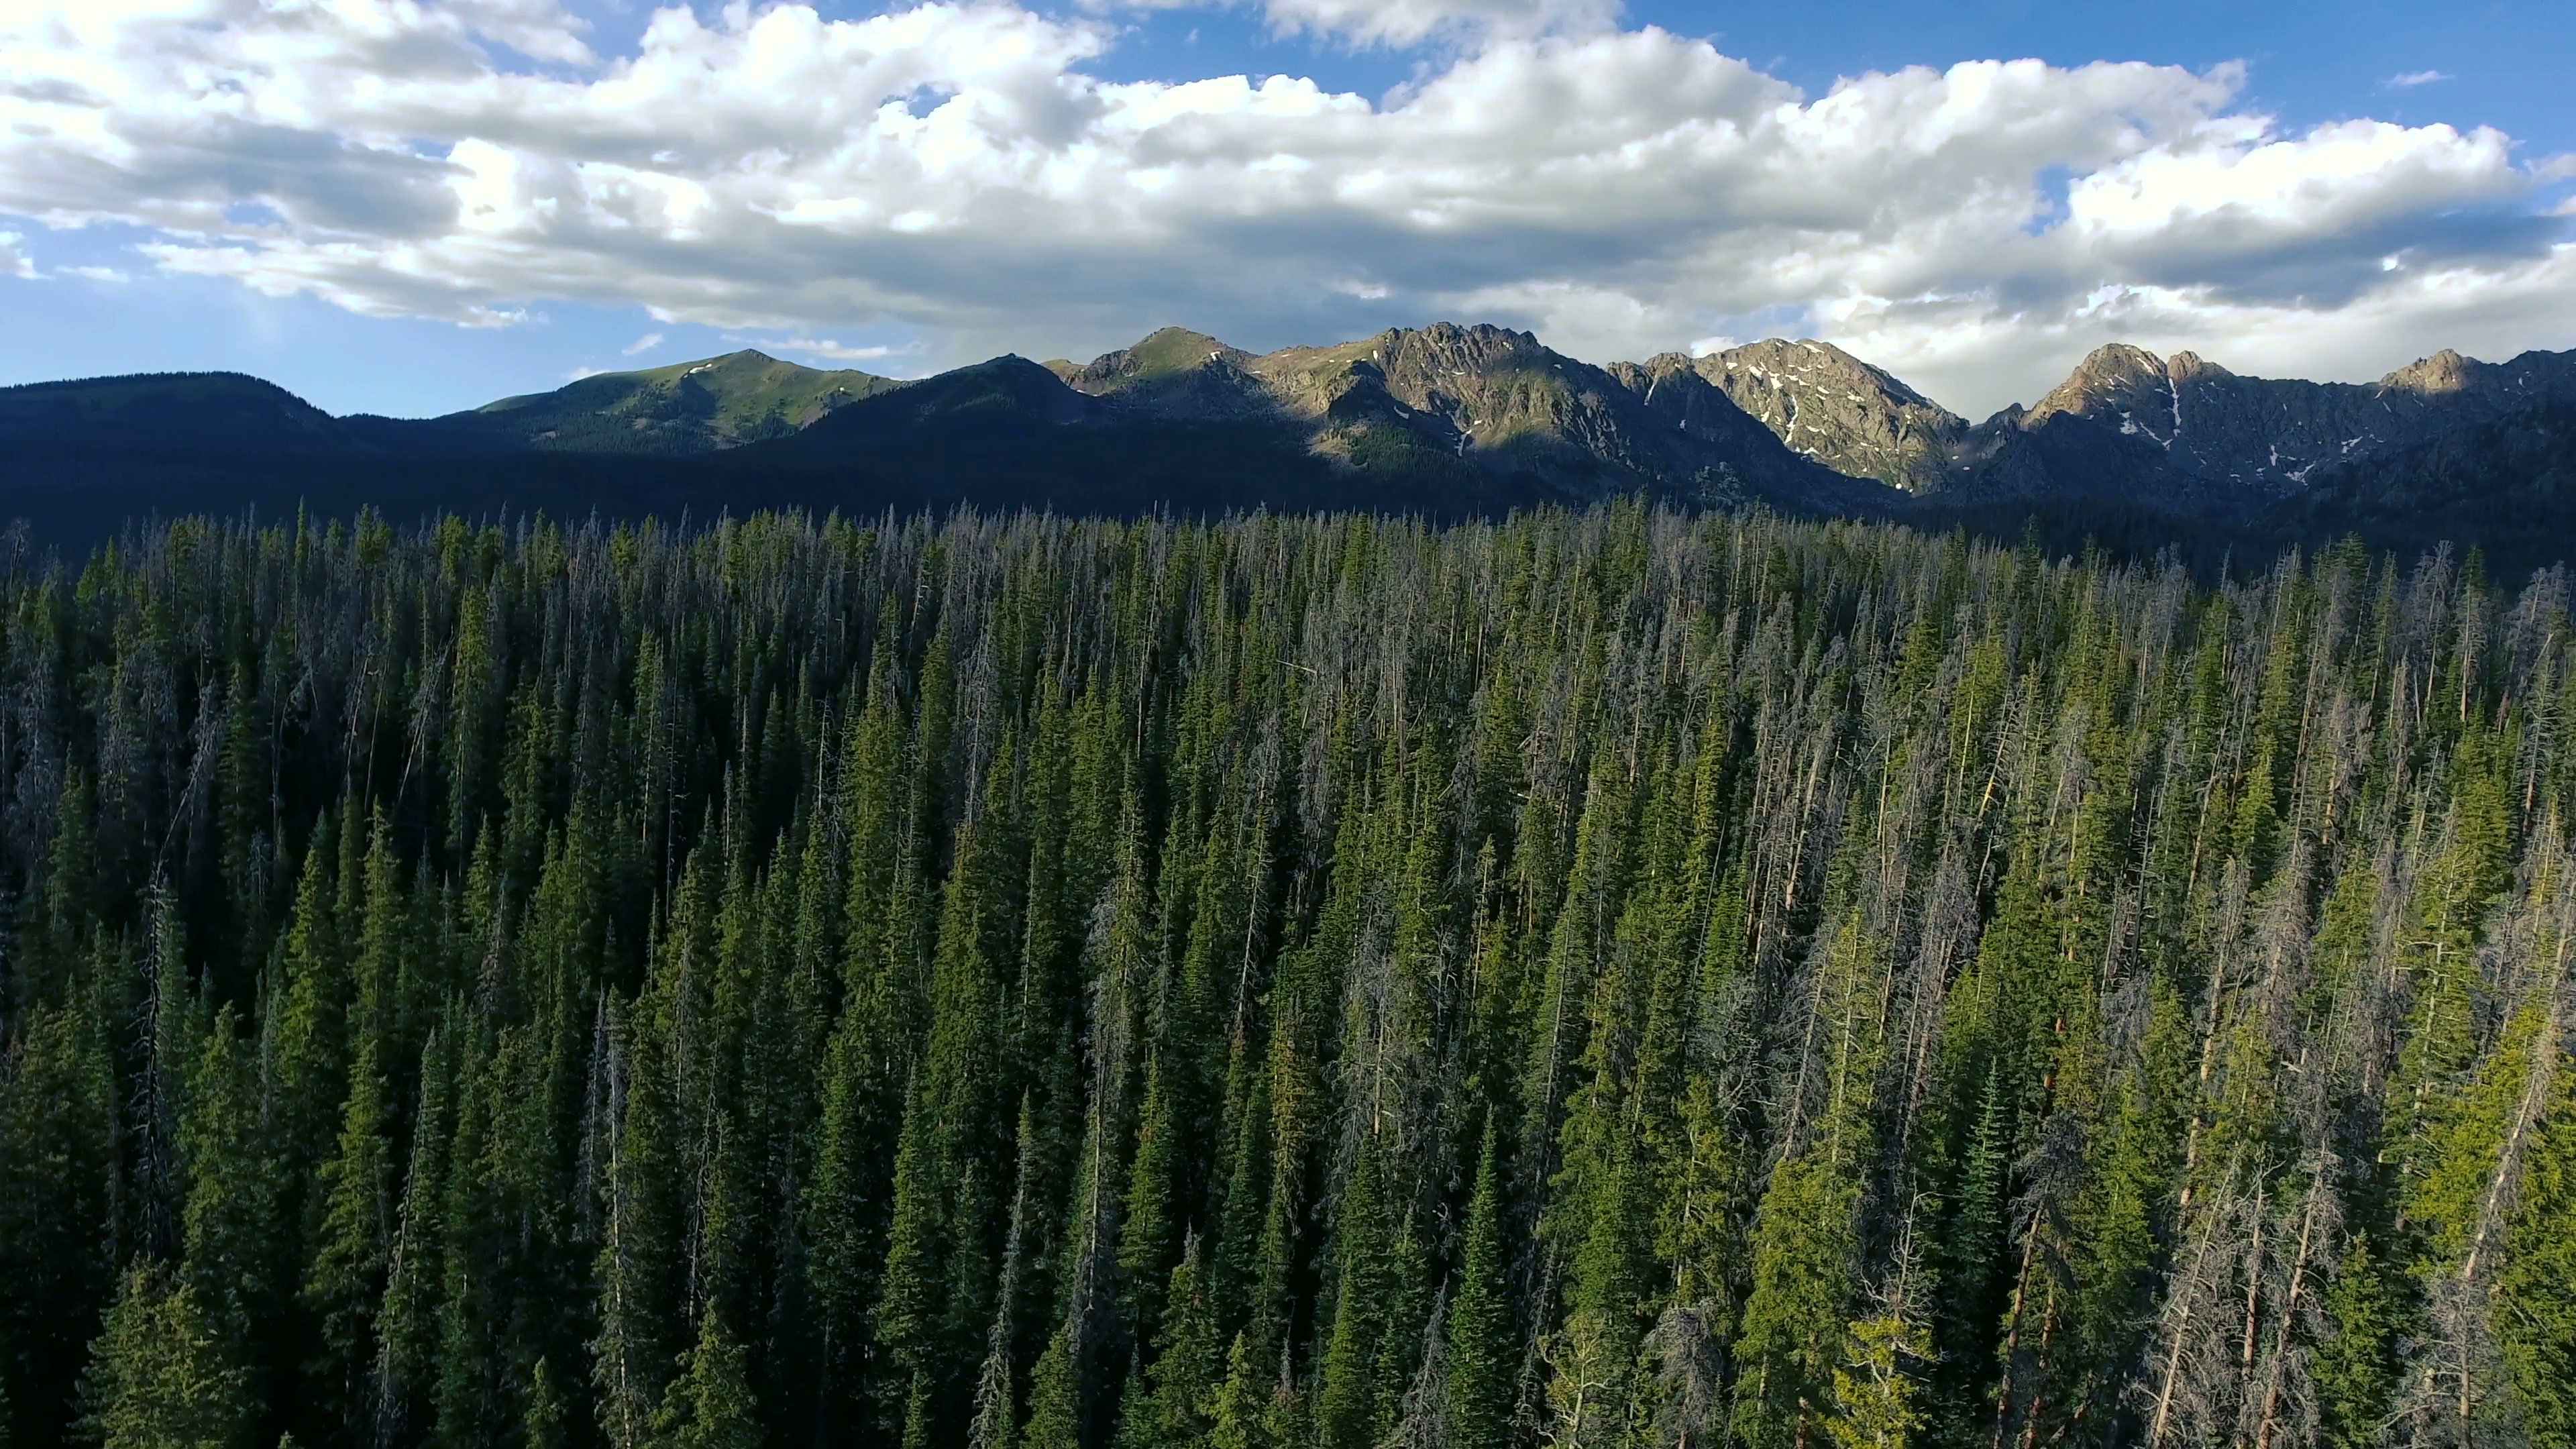 Flying over pine trees in a forest in the Colorado Rocky Mountains ...